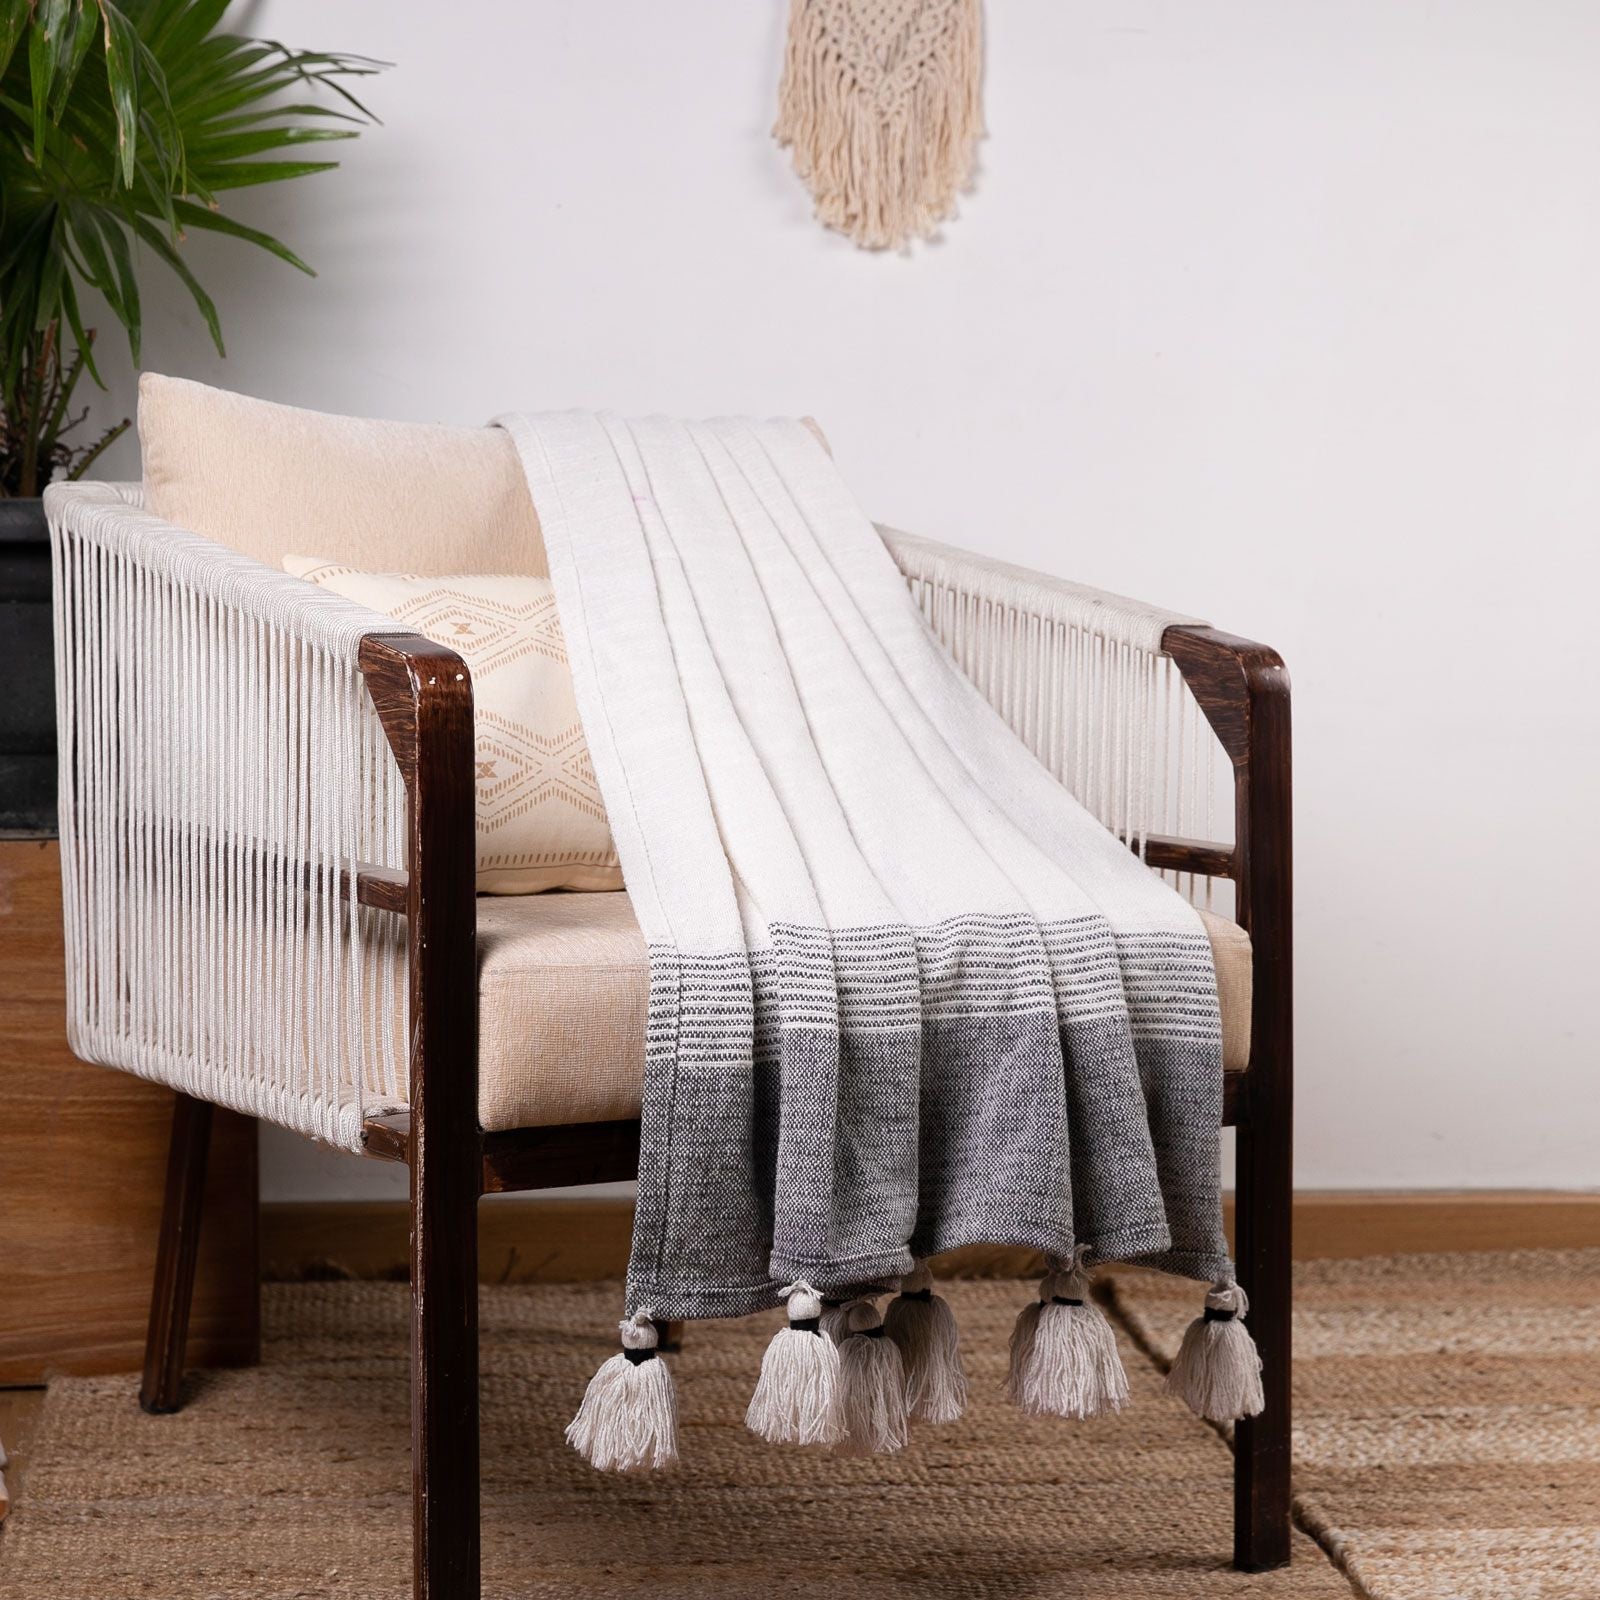 Cotton Throw with Tassels